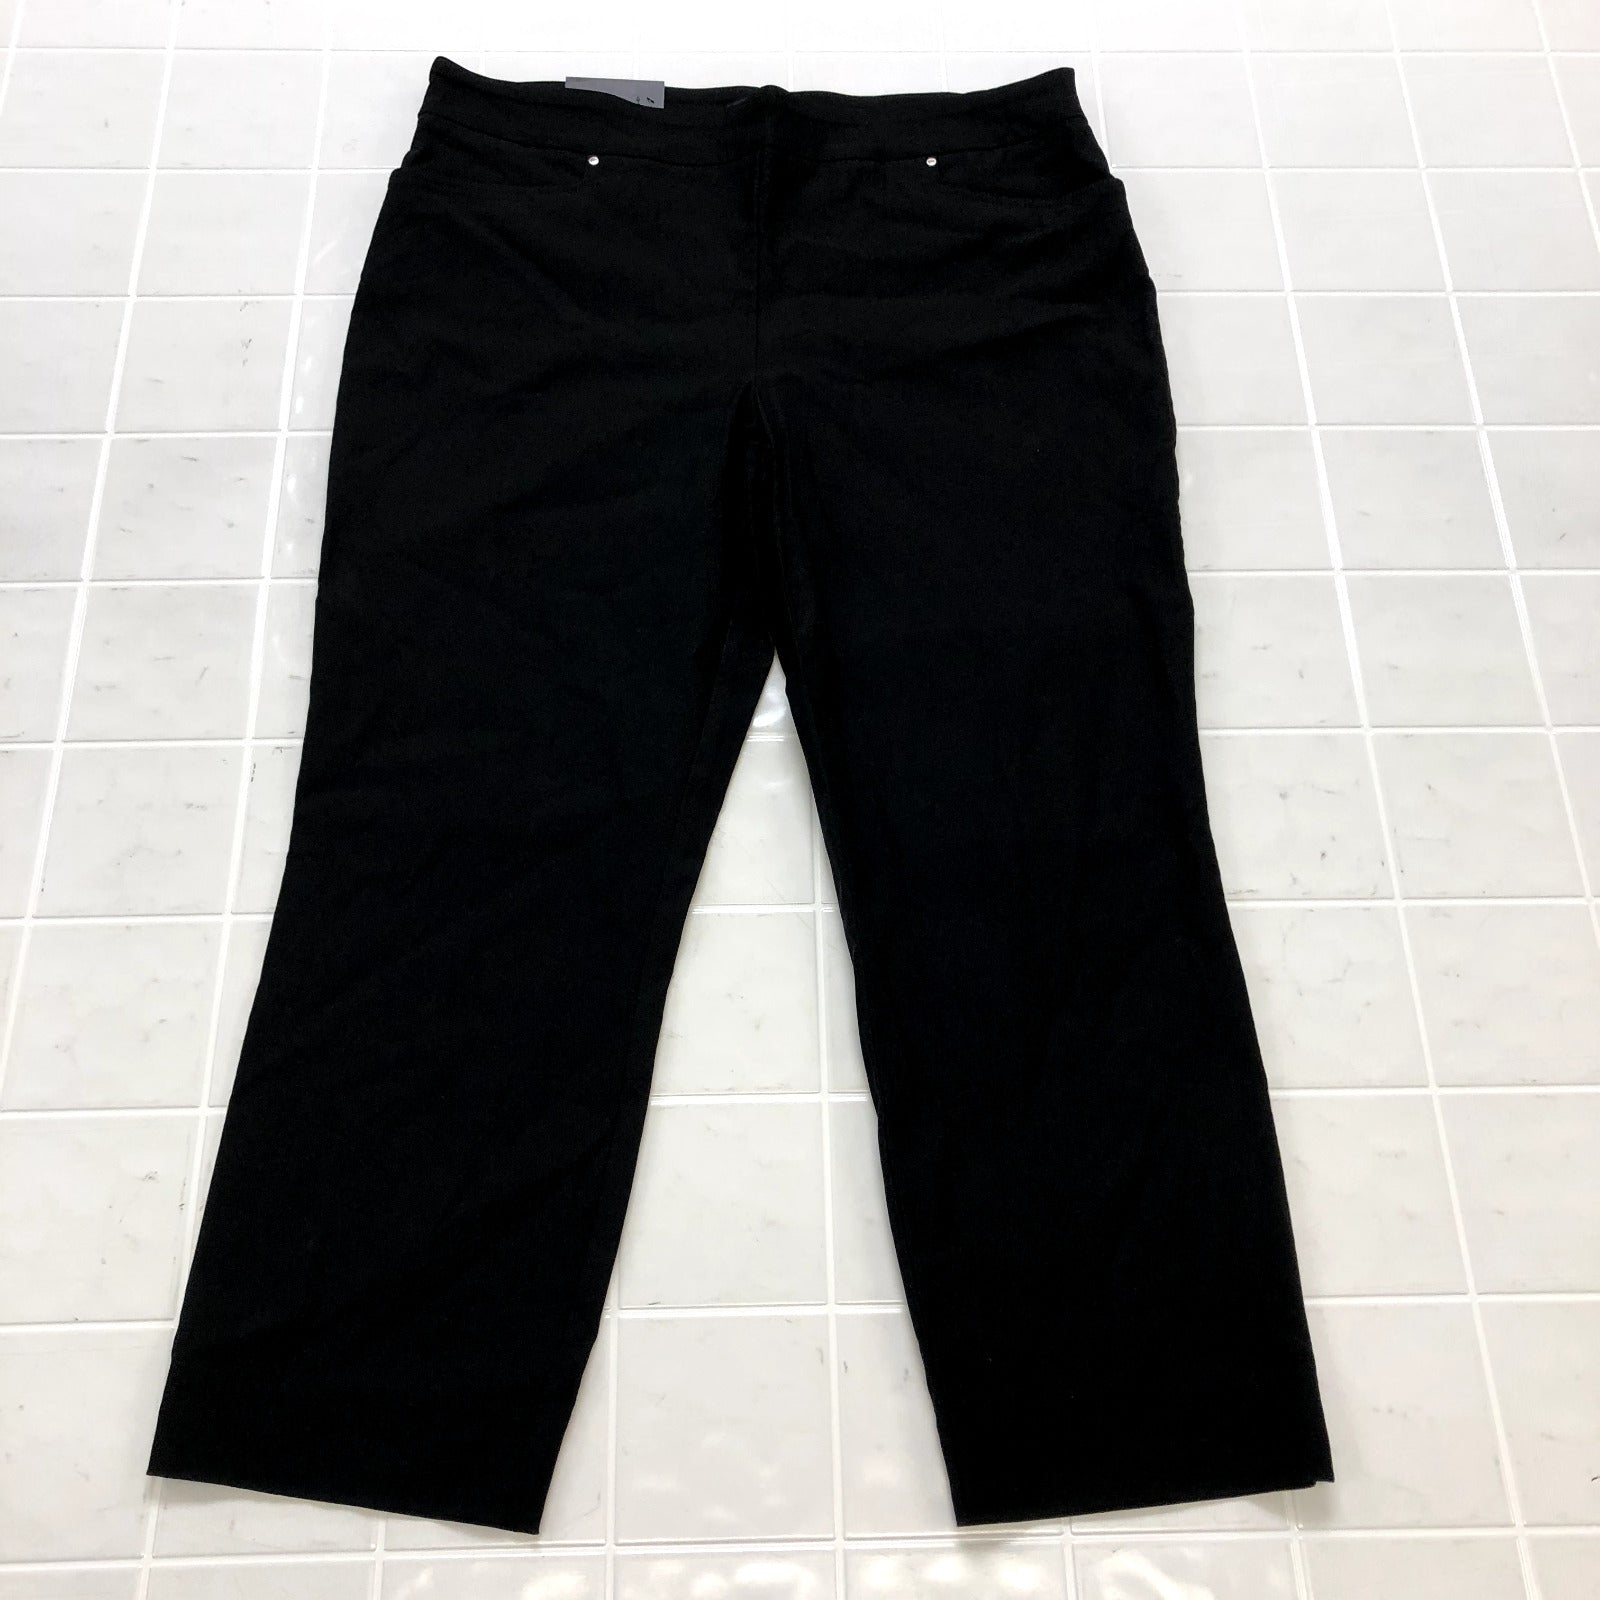 NEW Hilary Radley Black Flat Front Chino Slimming Tapered Pants Women's Size XL